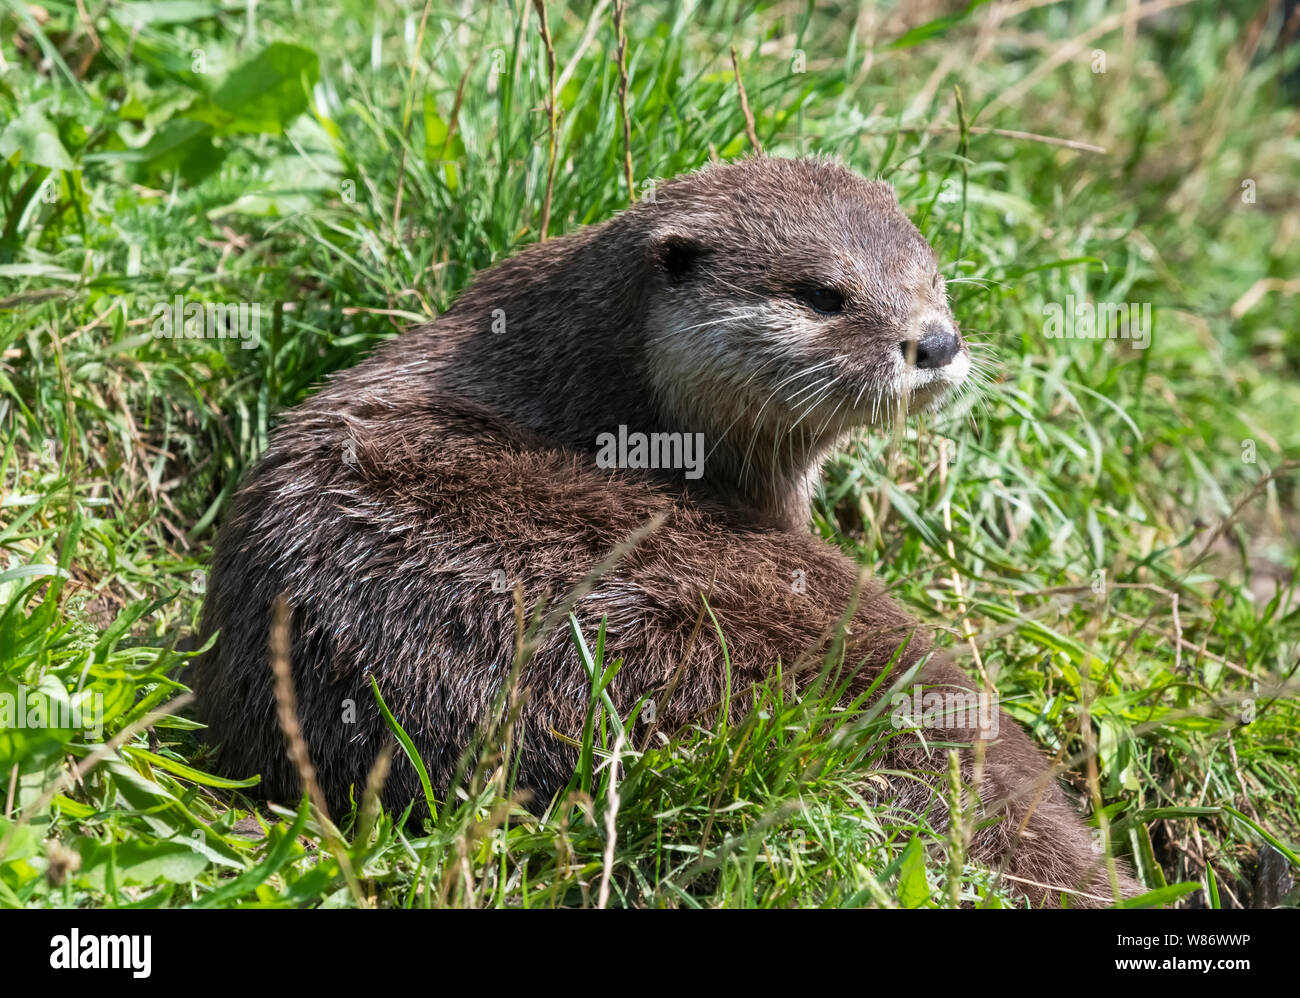 Asian Short Clawed Otter, (Aonyx cinereal) also known as the Asian Small Clawed Otter, is the smallest Otter species in the world Stock Photo